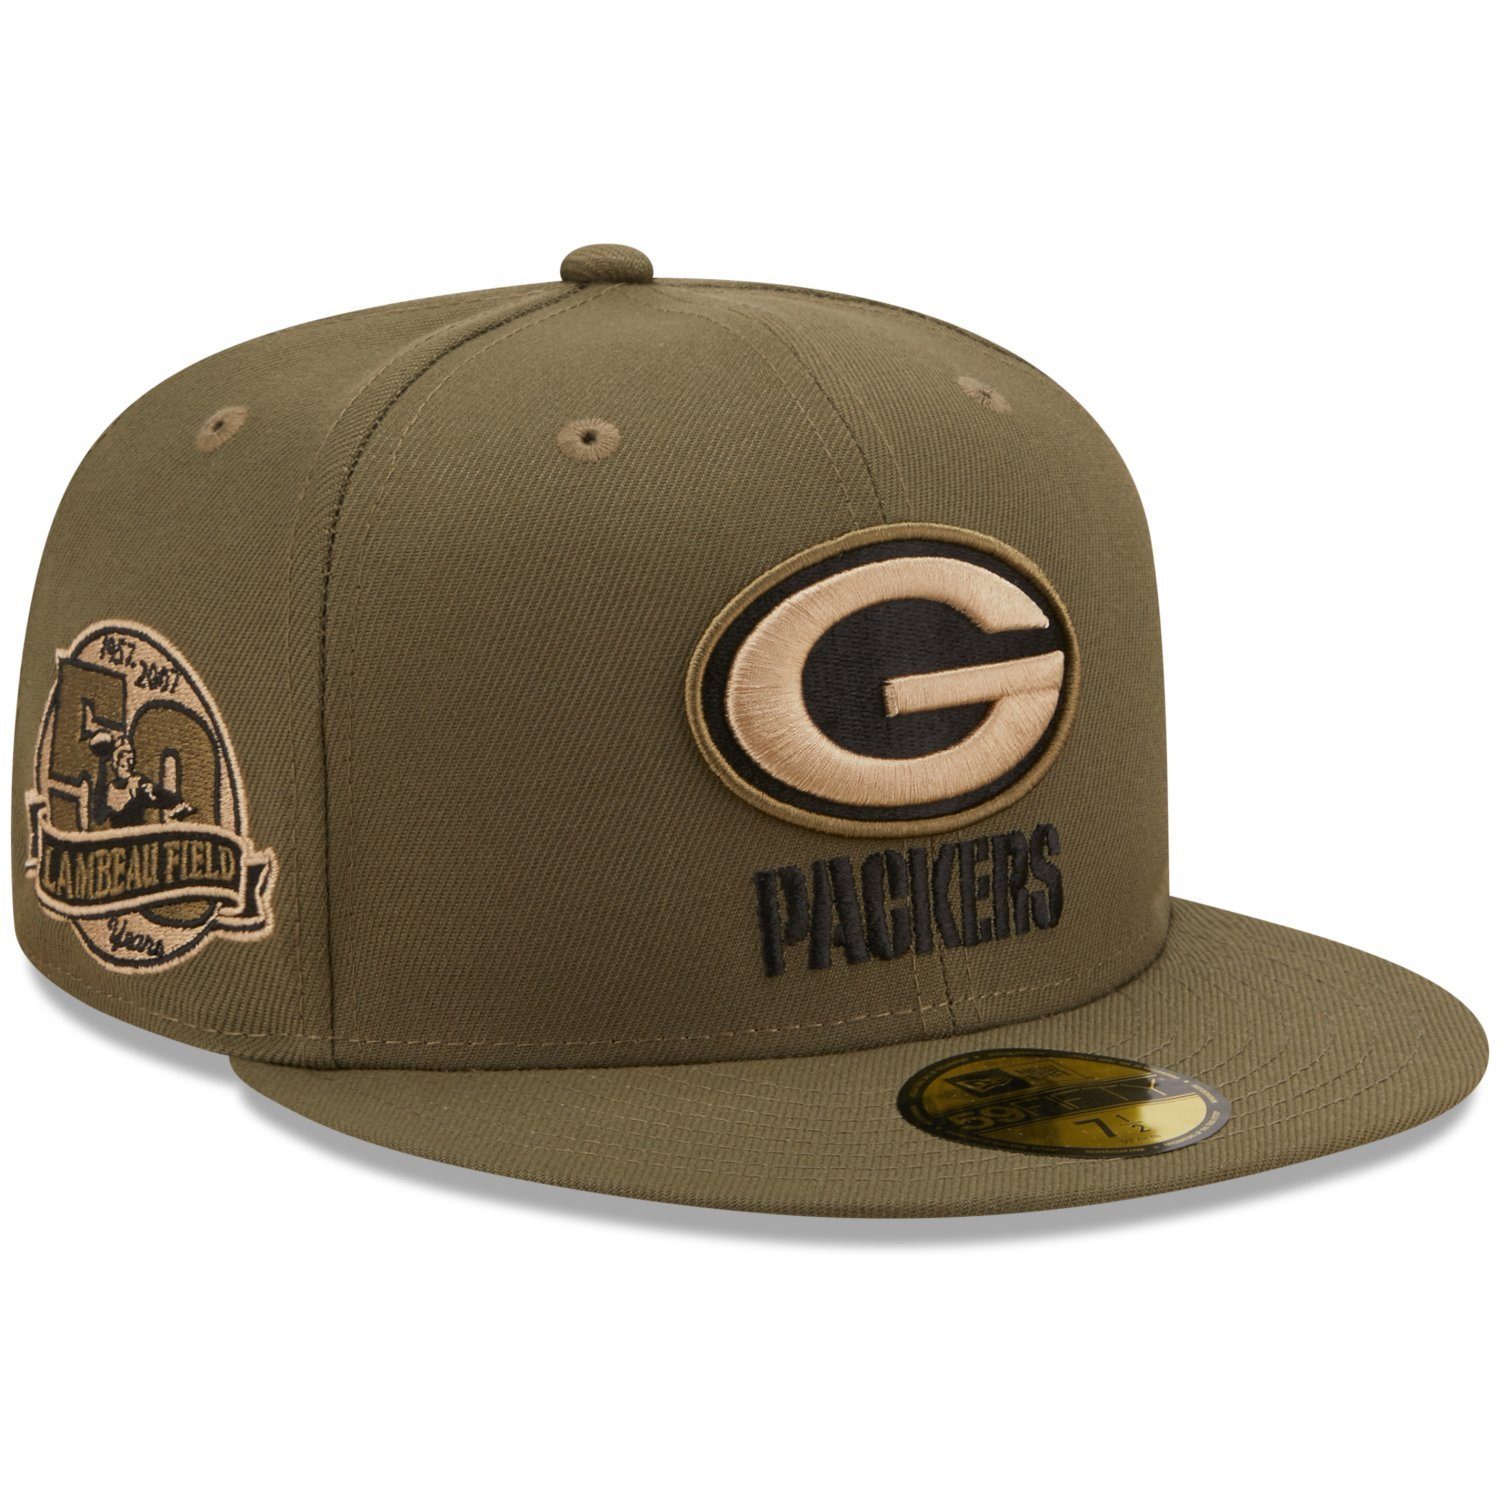 New Era Fitted Cap 59Fifty NFL Throwback Superbowl ProBowl Green Bay Packers | Fitted Caps